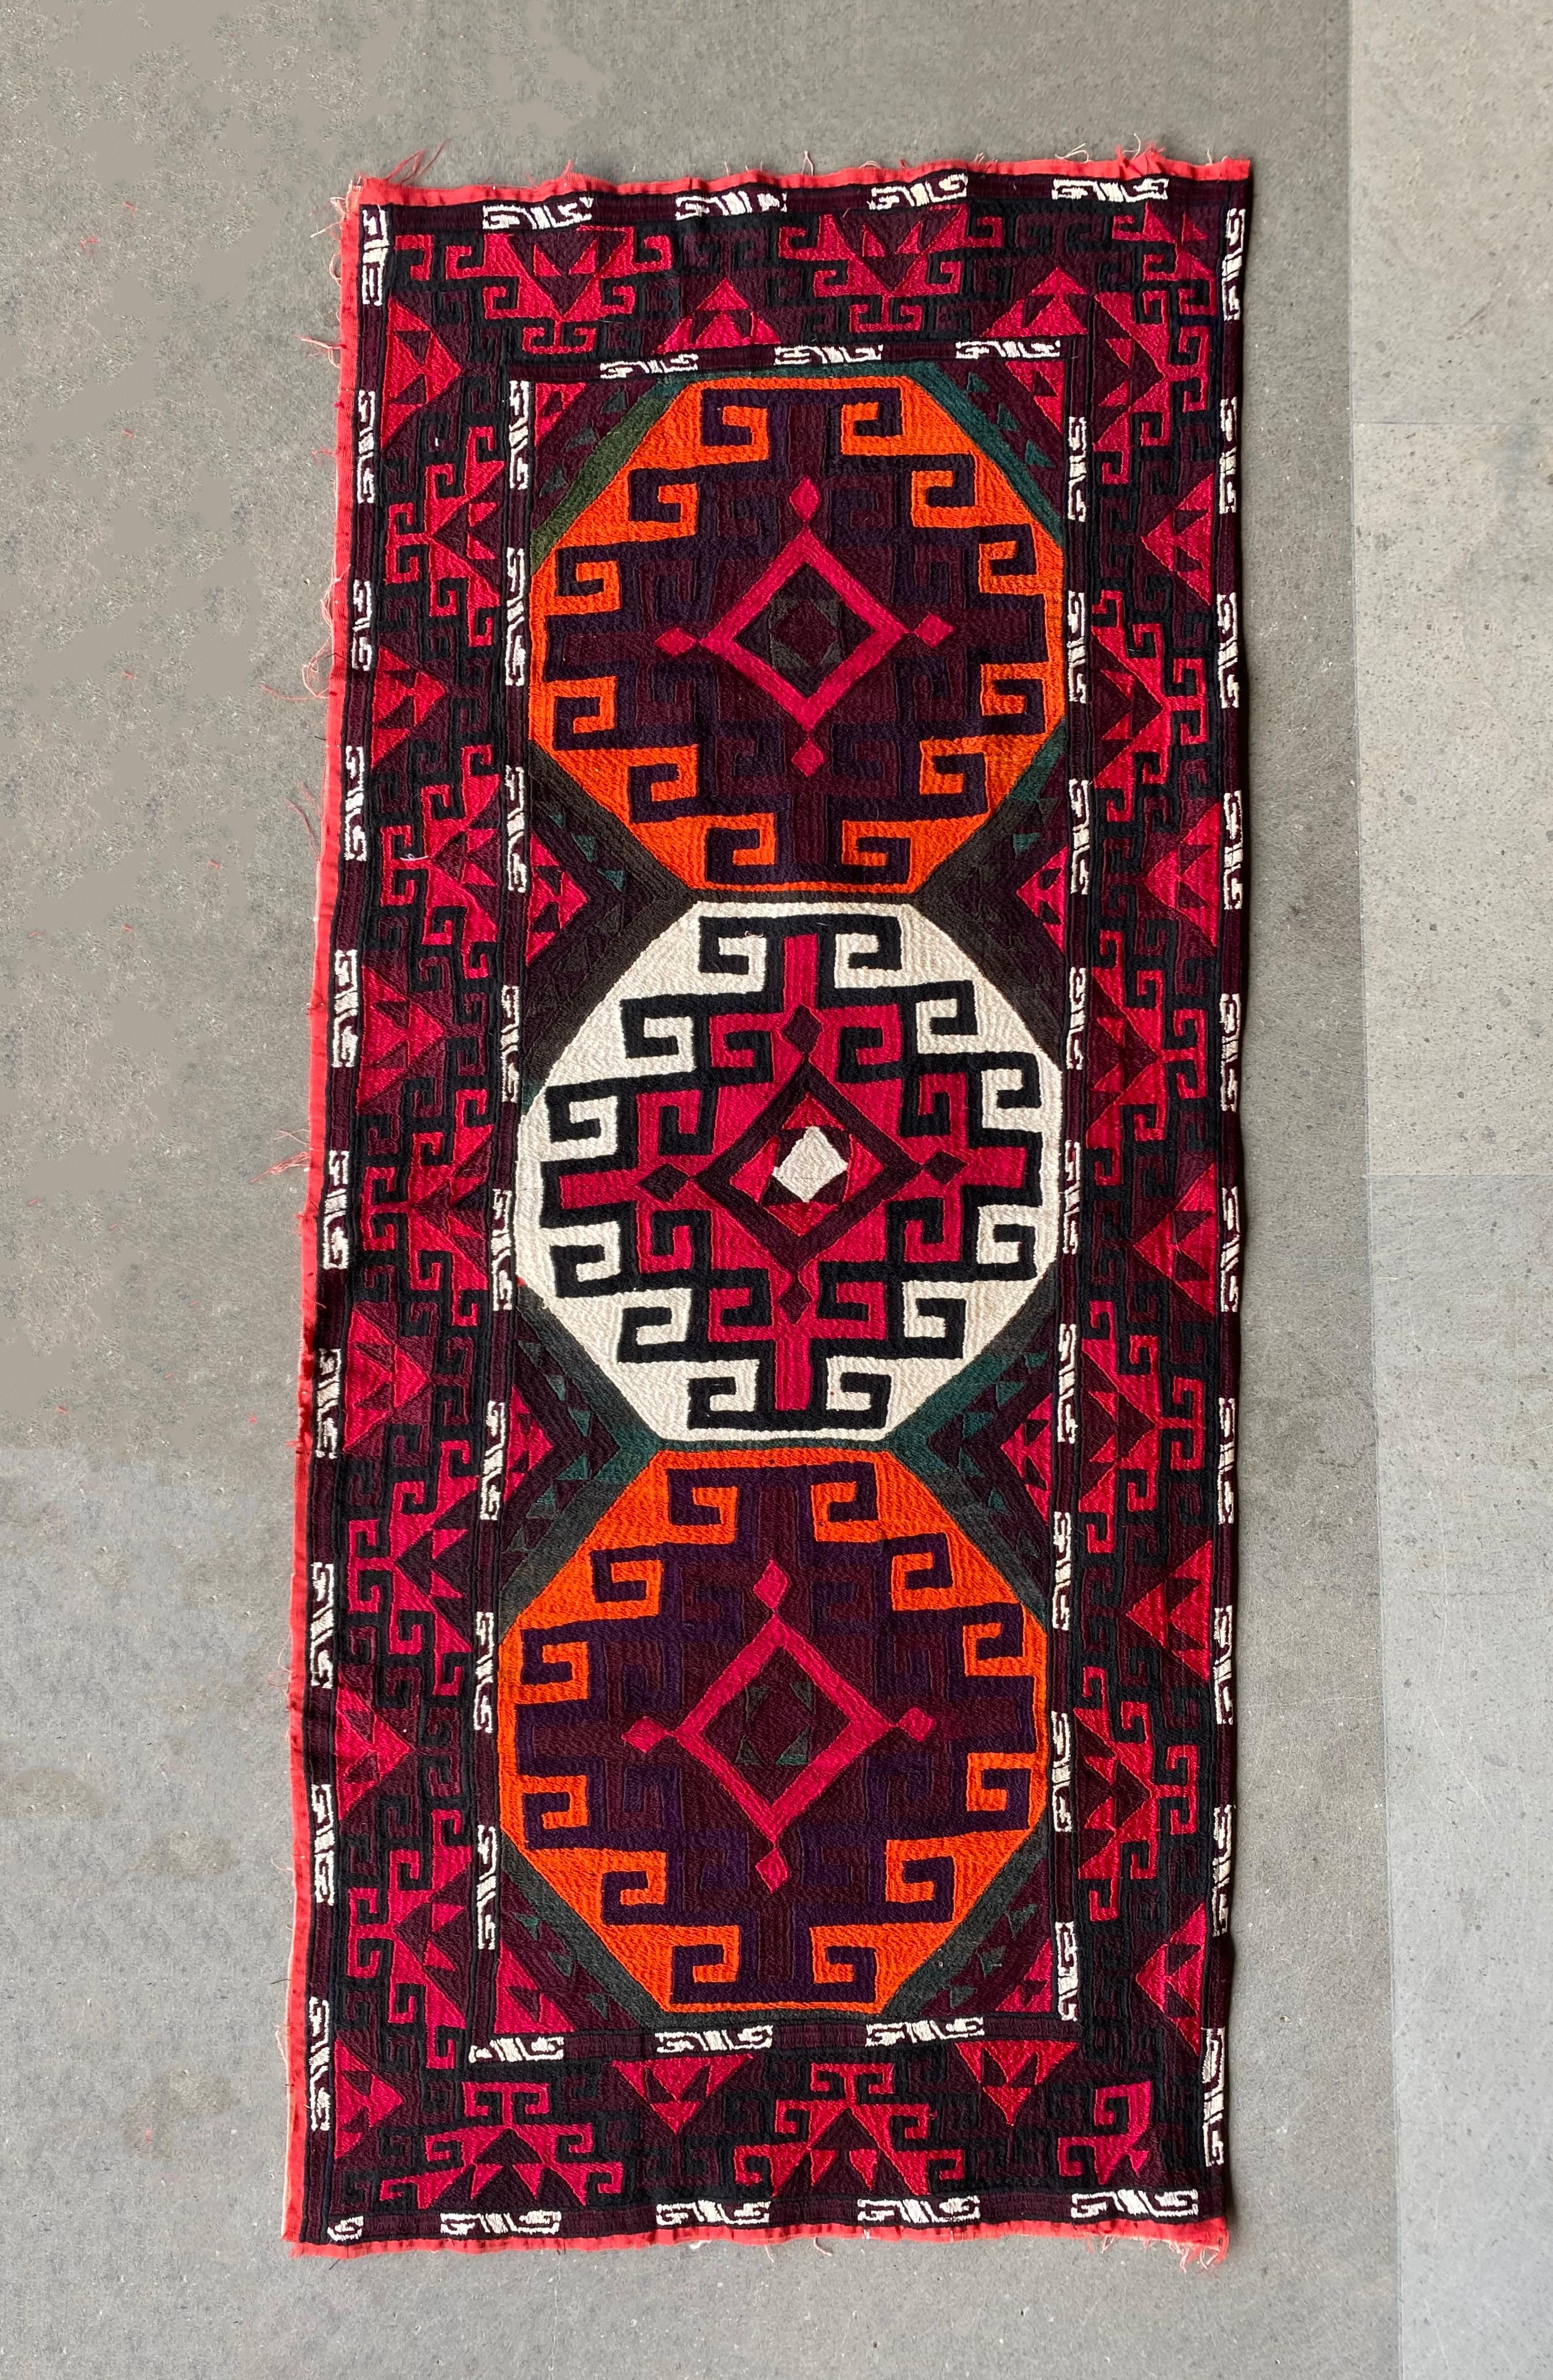 This textile is a “Suzani” from Central Asian nomadic peoples primarily from Kazakhstan, Tajikistan and Uzbekistan. Suzanis are embroidered textiles composed of mainly Cotton. They are cherished and admired for their elaborate designs, motifs and